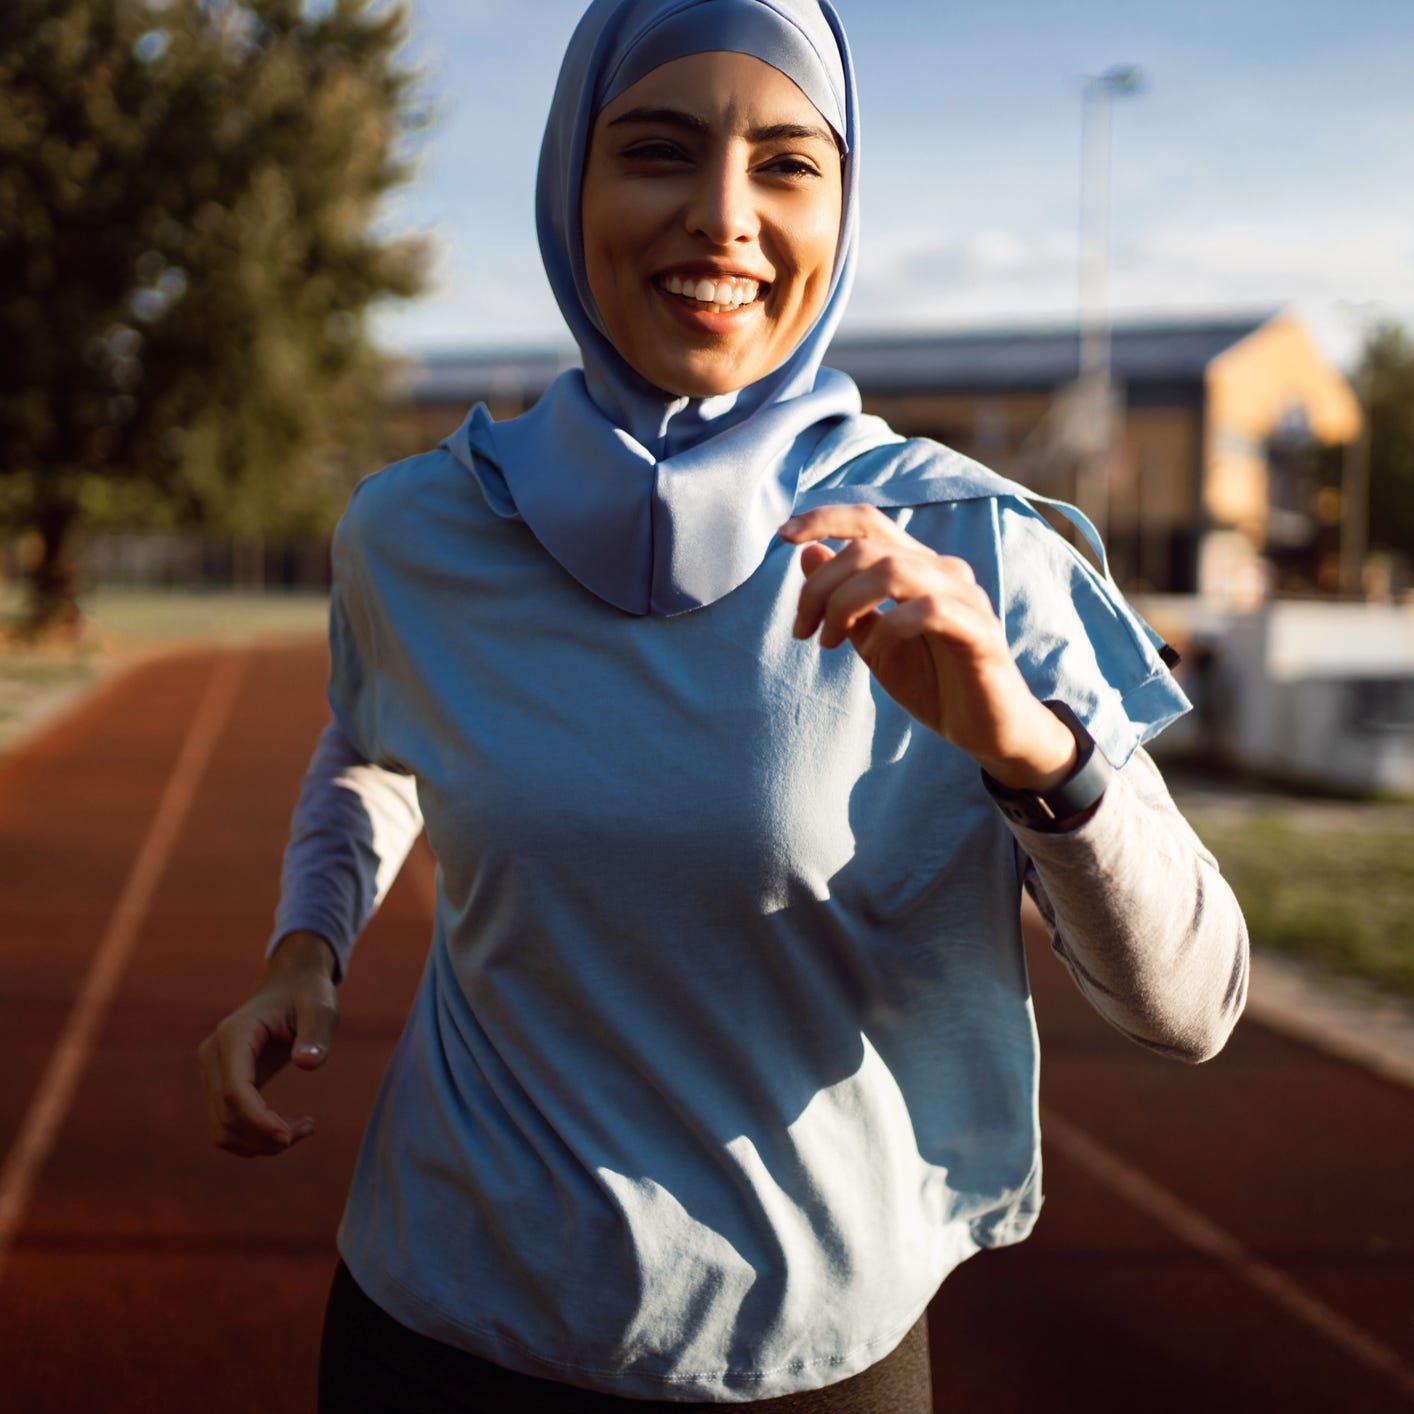 The Advice You Need to Continue to Run Strong During Ramadan